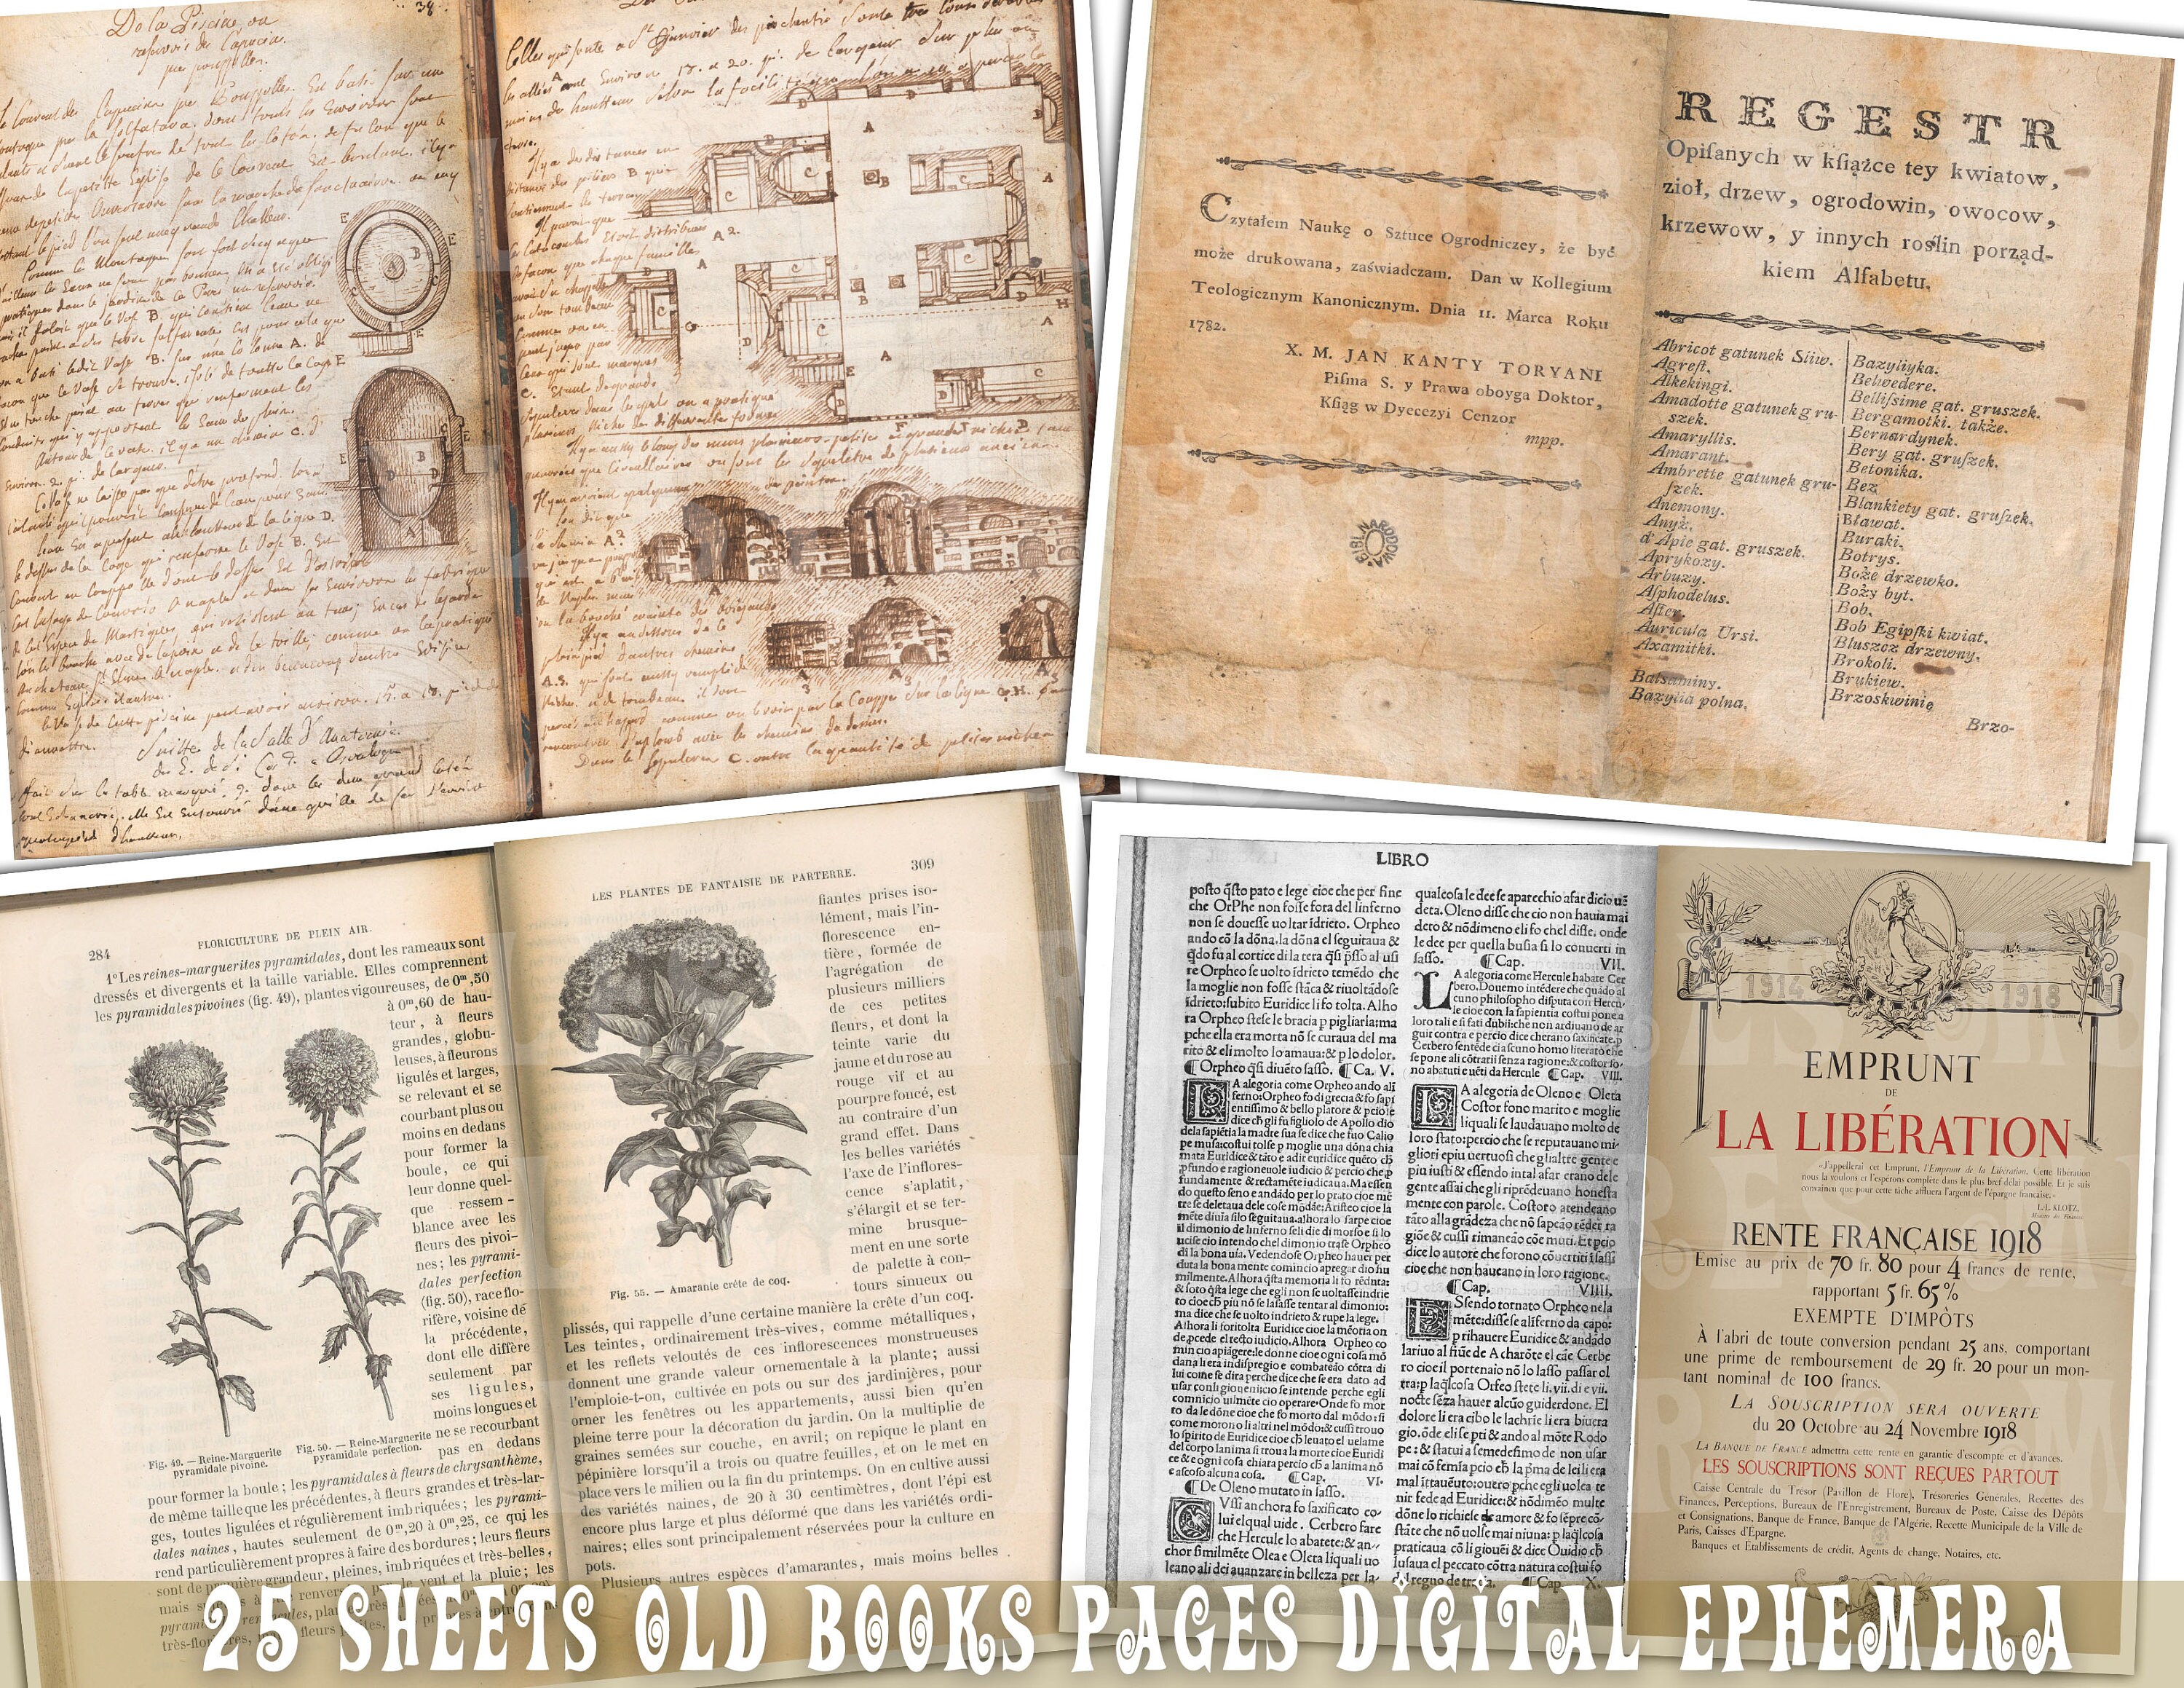 Book Paperie for Crafting, Junk Journal Supplies, Antique and Vintage –  Pretty Old Books